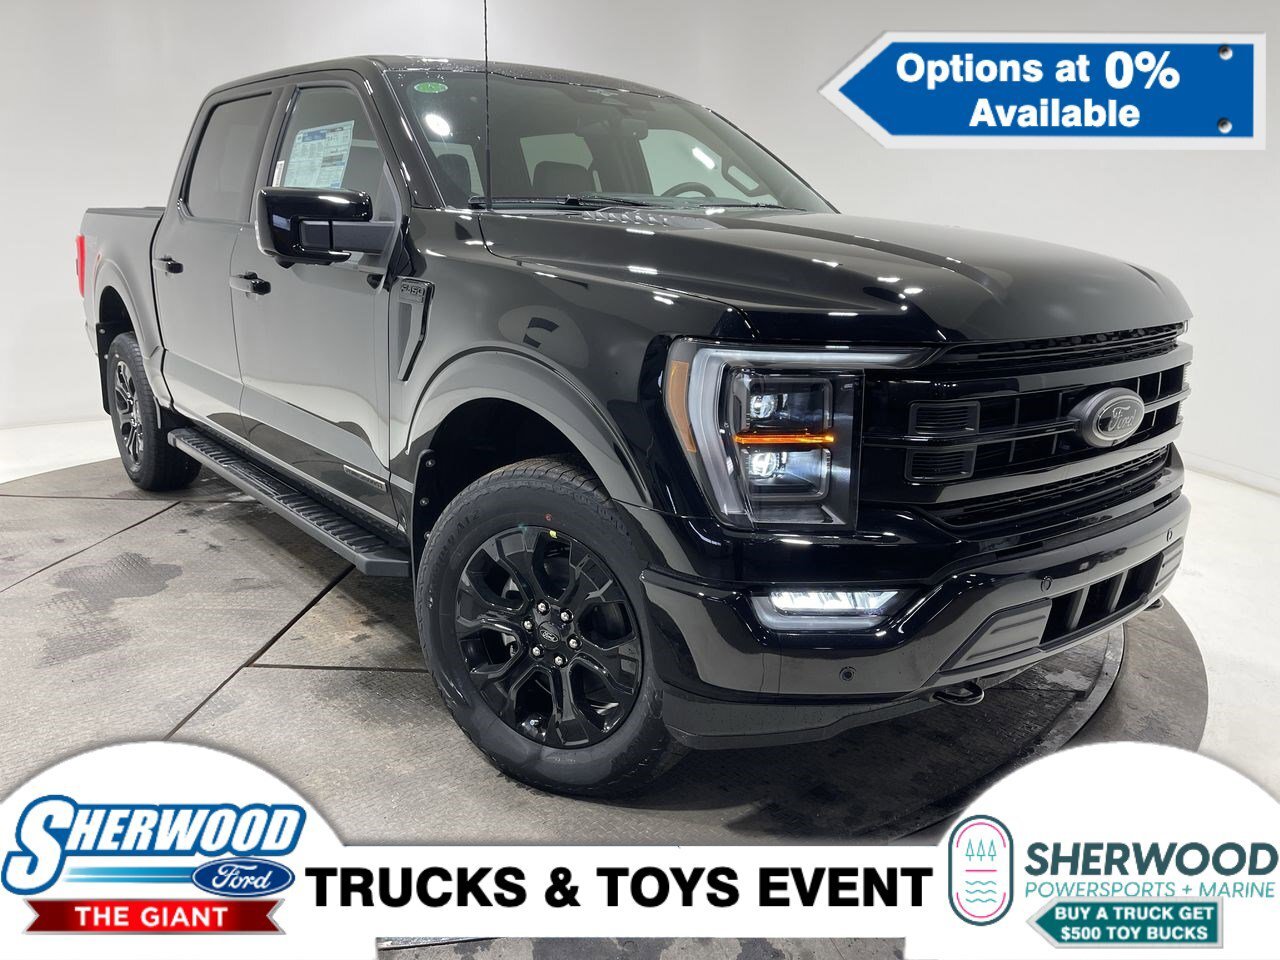 2023 Ford F-150 LARIAT - 502A - BLACK APPEARANCE - FX4 - 360 CAM